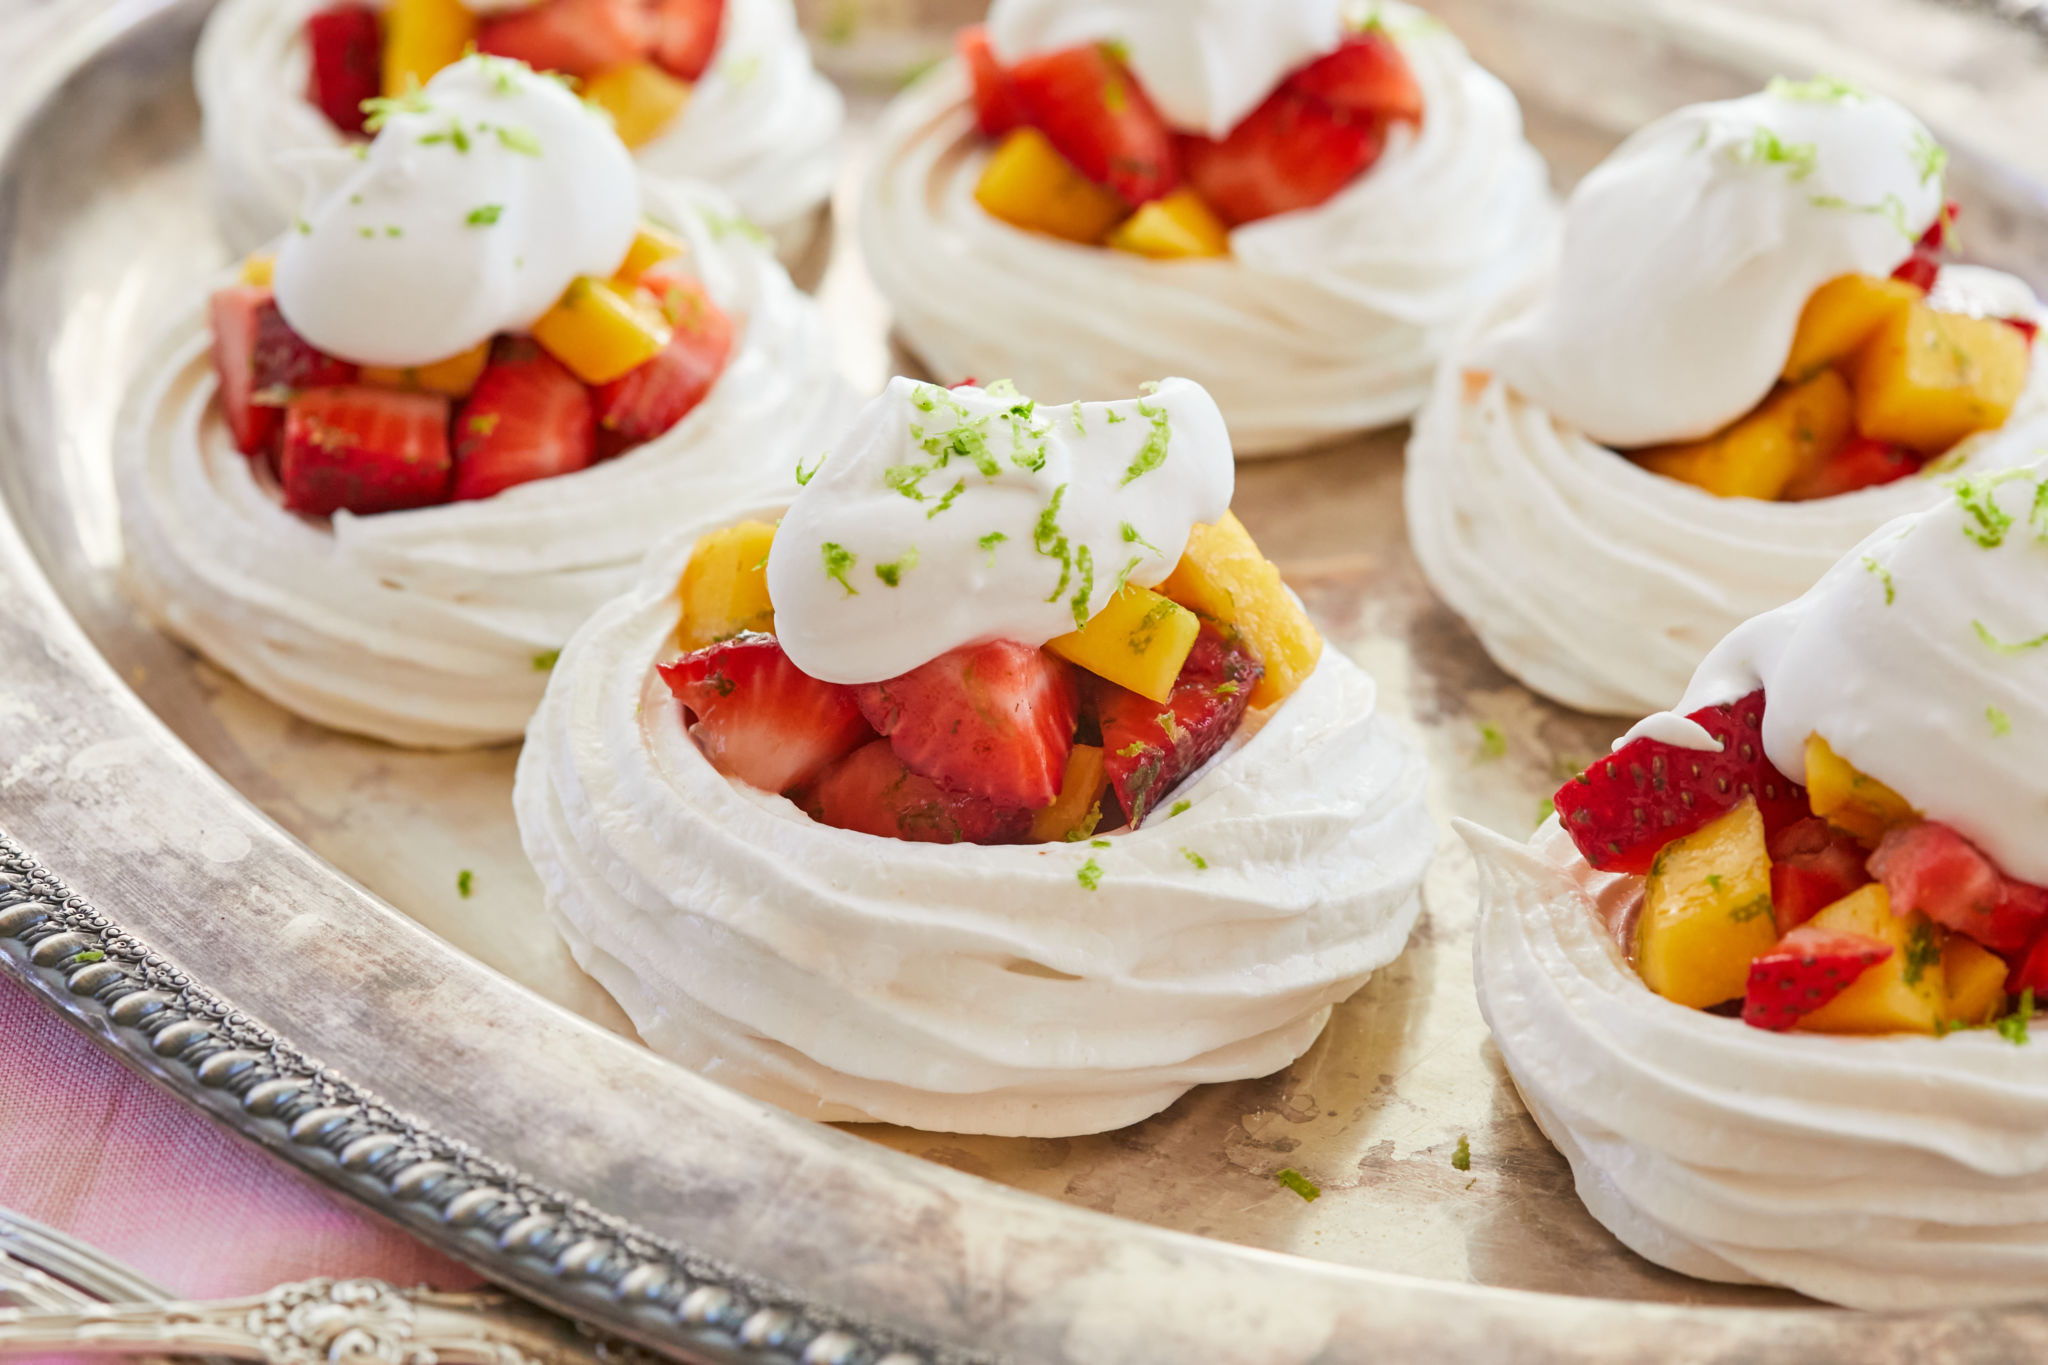 Heavenly Meringue Nests are placed on a silver platter. They are white layers of crispy billowy meringue loaded with irresistible tropical red strawberries and vibrant yellow mangoes, and adorned with velvety coconut cream, and green refreshing lime zest.